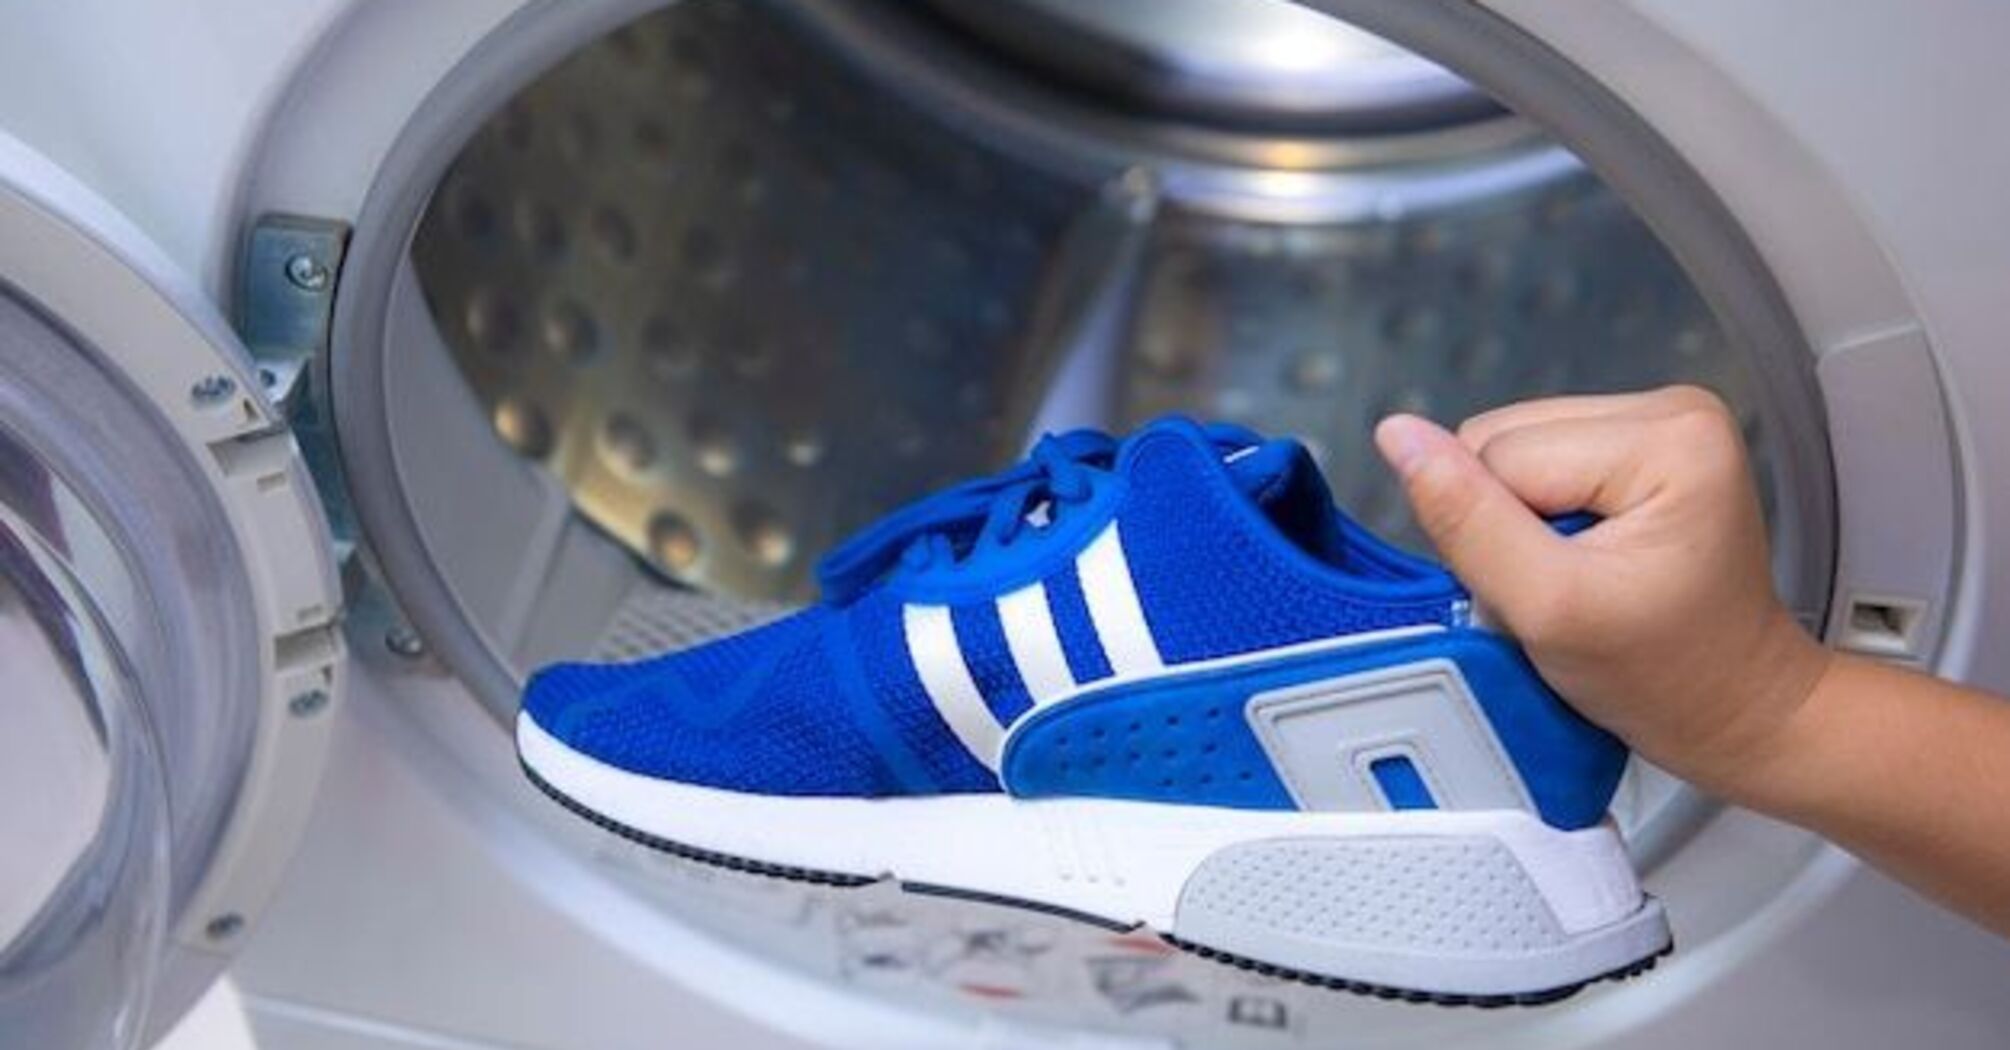 How to machine wash sneakers: useful tips